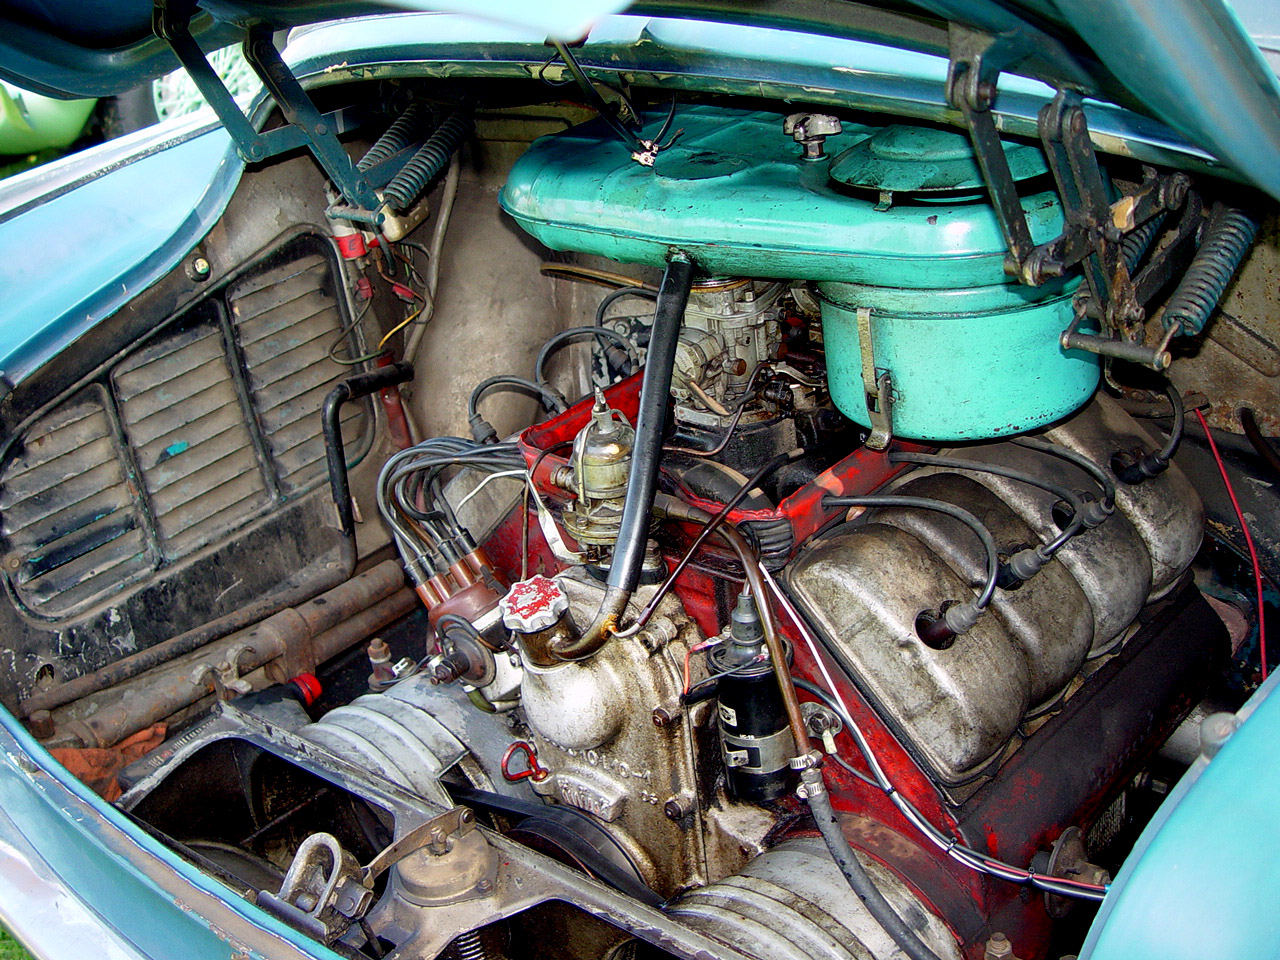 the engine compartment of an old, broken down blue car